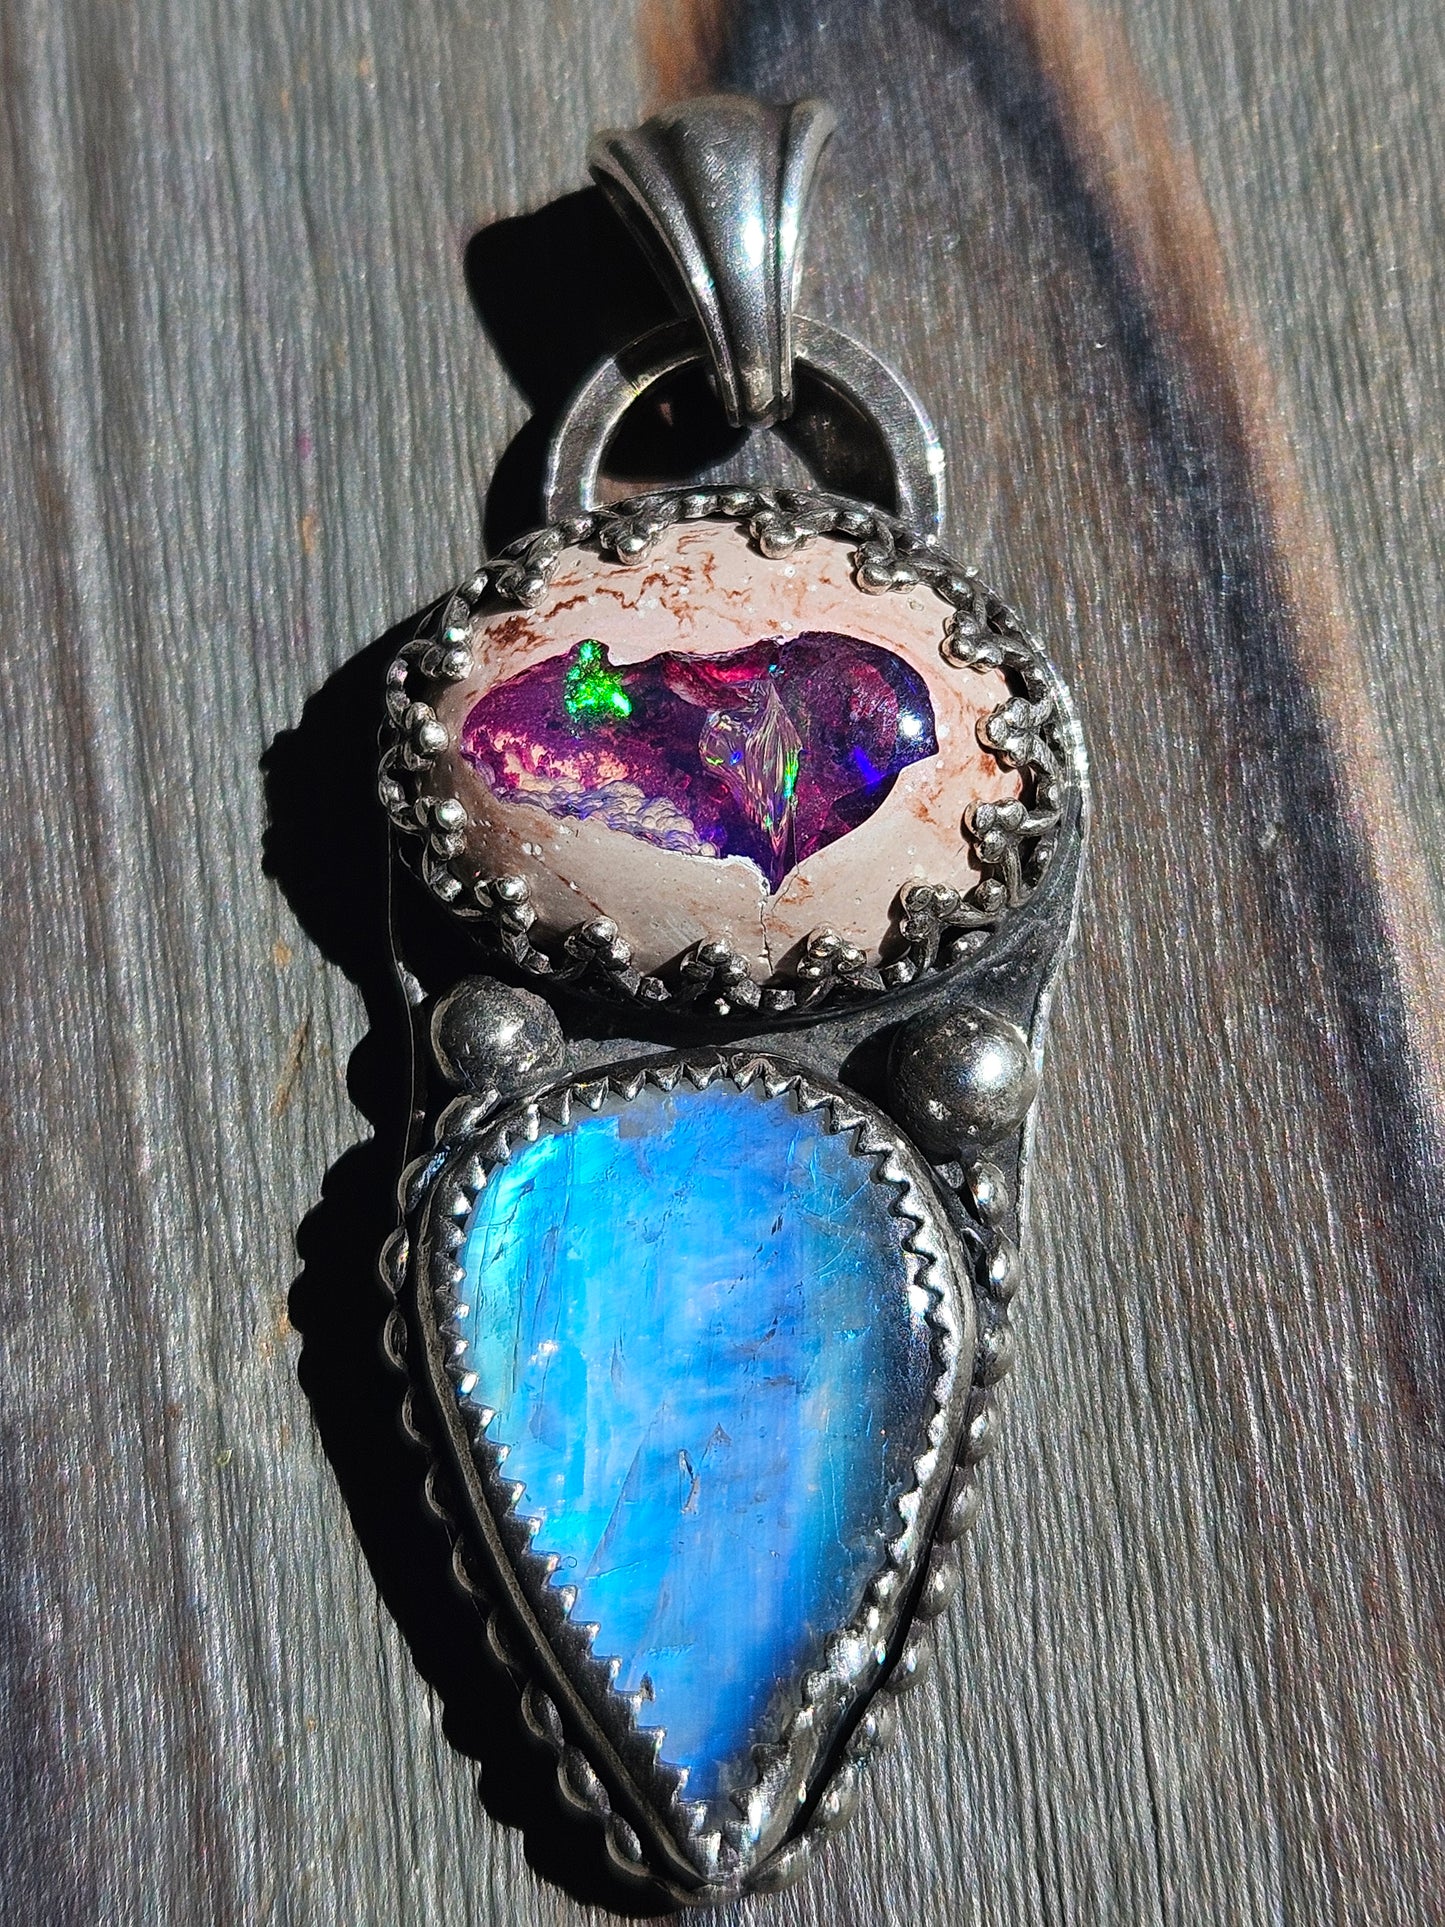 Mexican Galaxy Opal and Moonstone Pendant